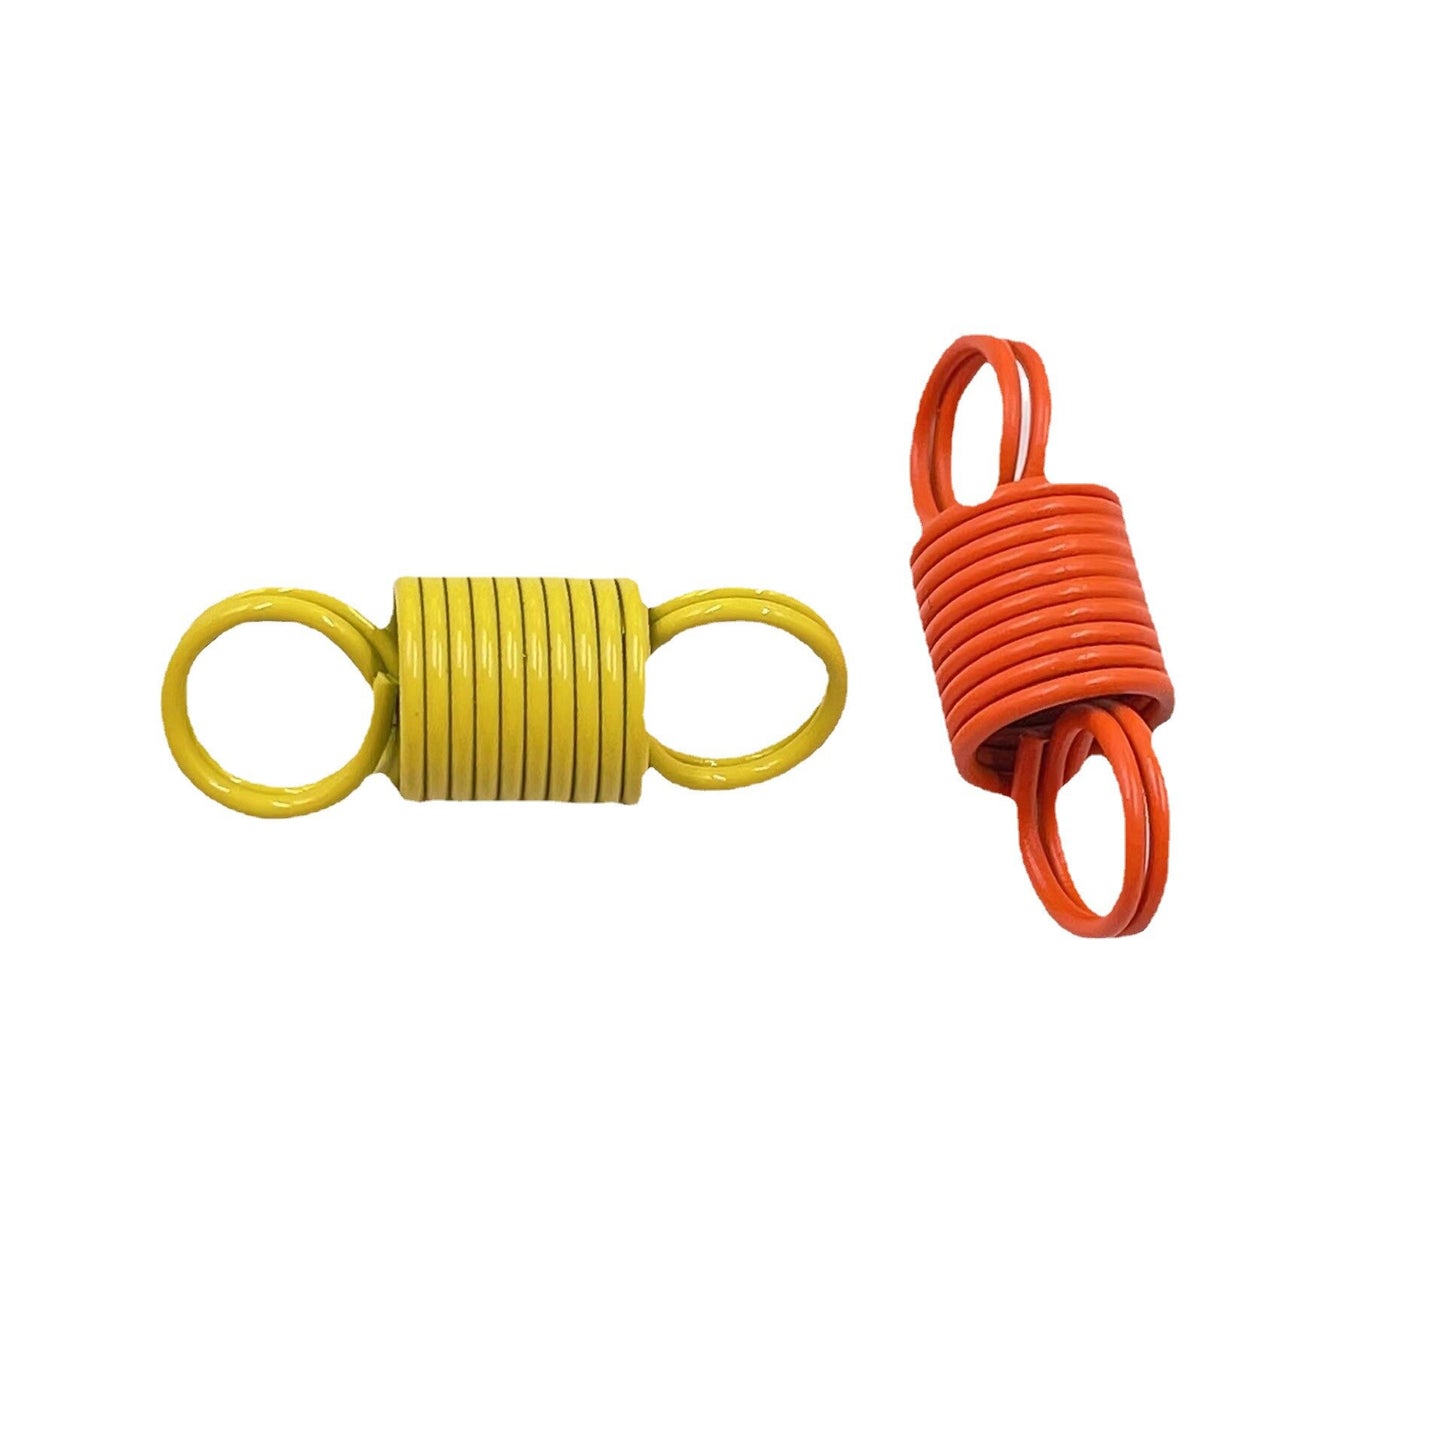 20pcs/llot Color Spring Double Hole Link Buckle Spiral Tension Spring Buckle Diy Jewelry Accessories Tension Spring Wholesale